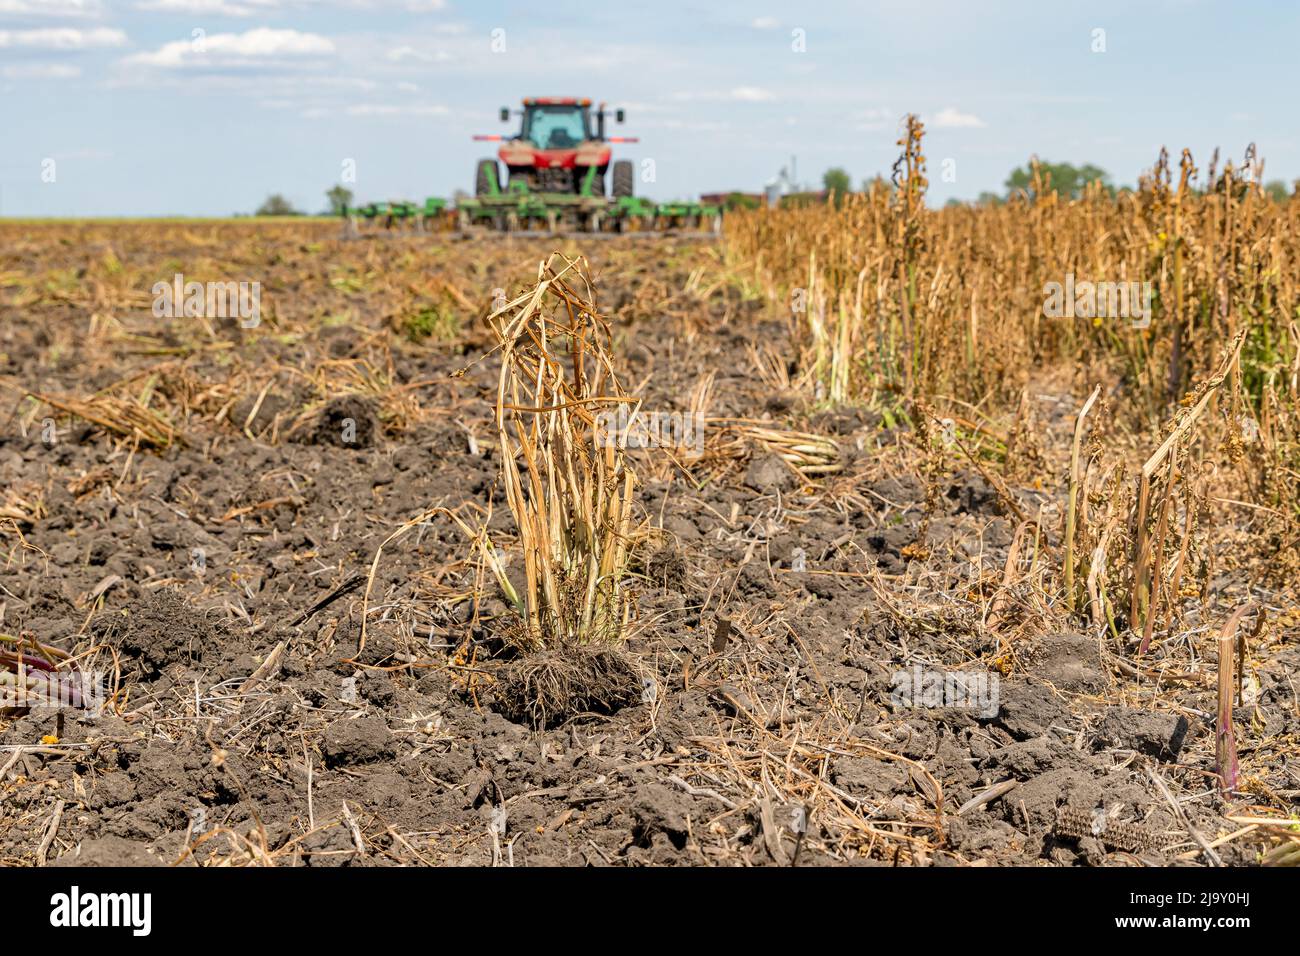 Wilting Butterweed weed after herbicide spraying in farm field with tractor and cultivator. Weed control, herbicide and farming concept. Stock Photo